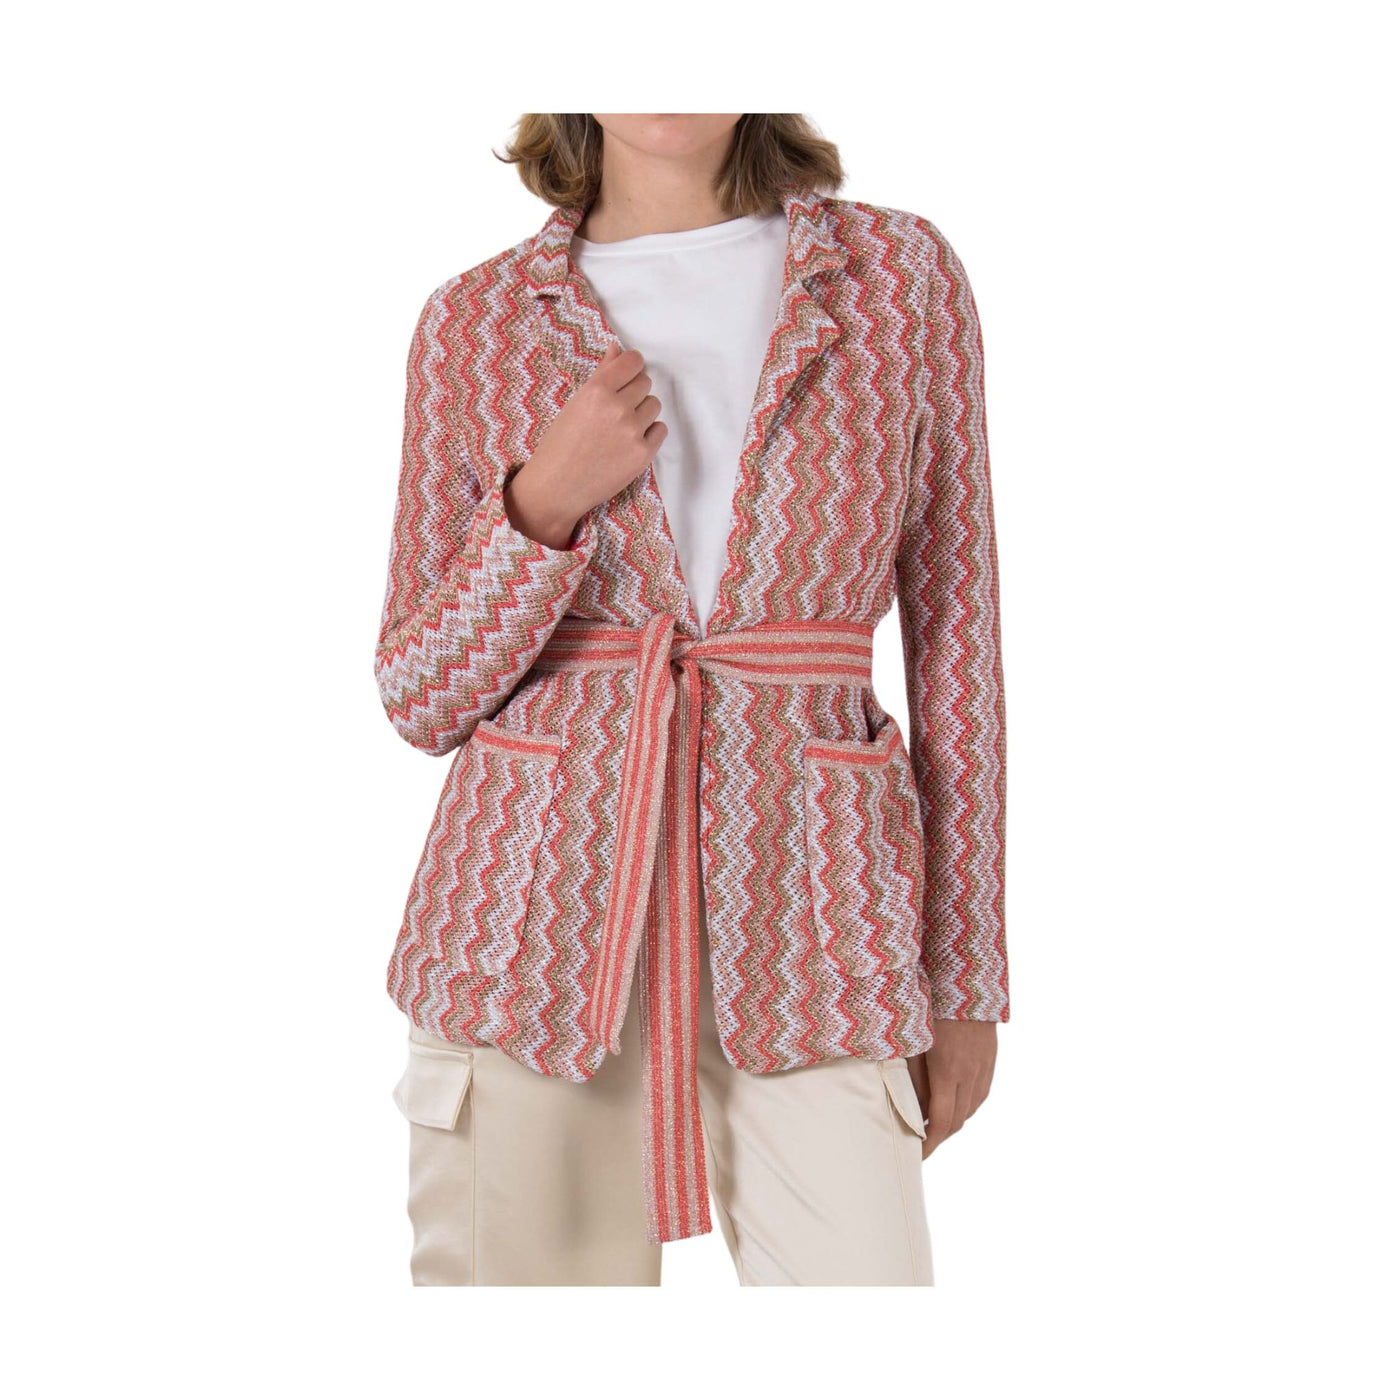 Women's knitted jacket with zig zag pattern